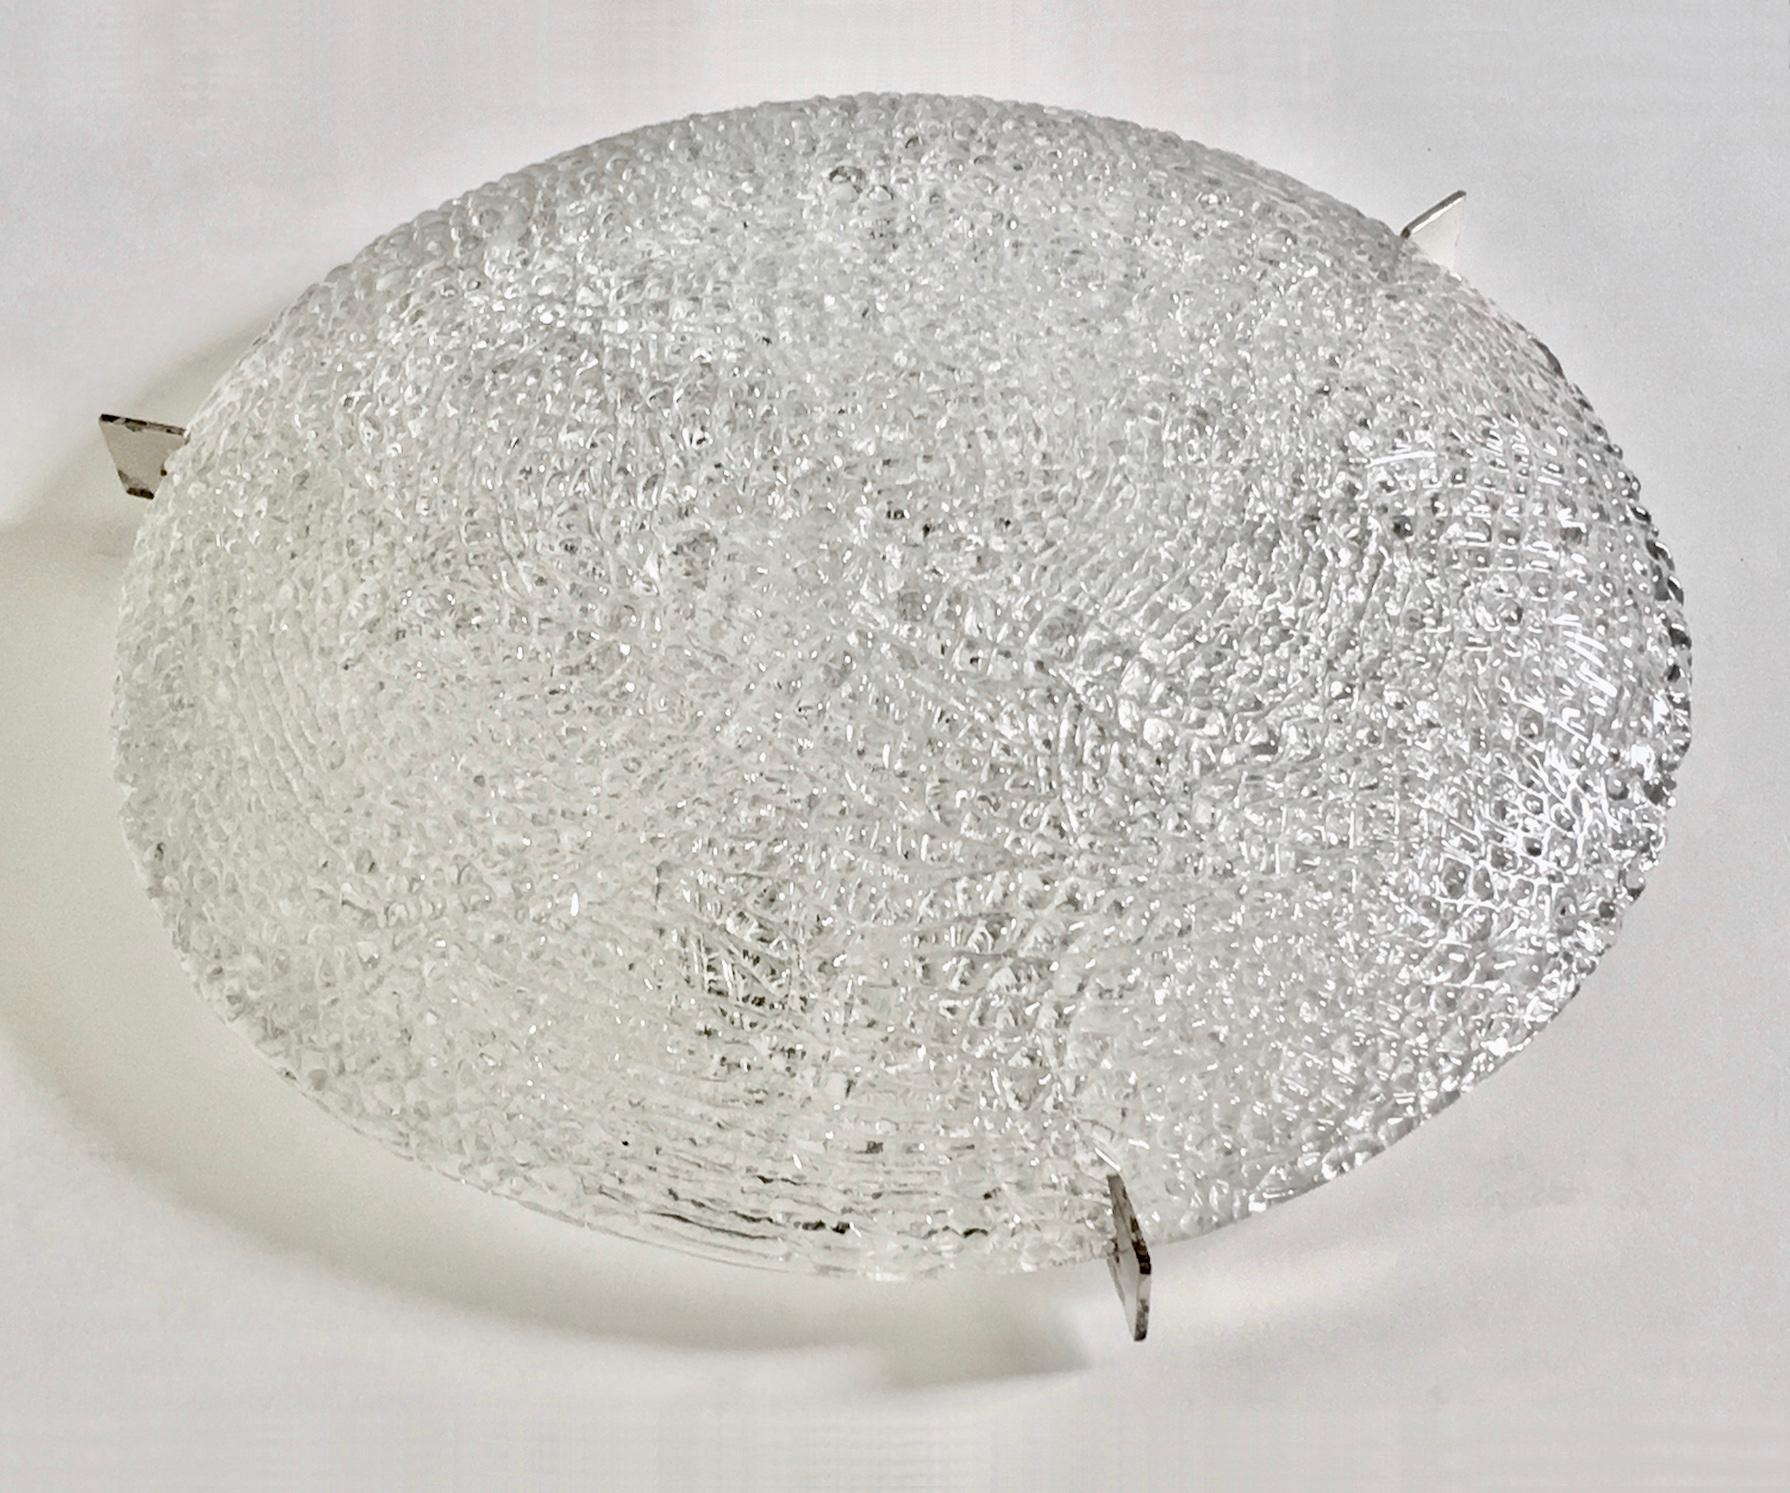 *** Special price for Black Friday / Cyber Monday ***

Large glass flush mount by Kaiser, Germany. Mid-20th century.

Single piece of handcrafted textured clear glass held in place by three chrome-plated brackets. The ceiling plate is white metal,